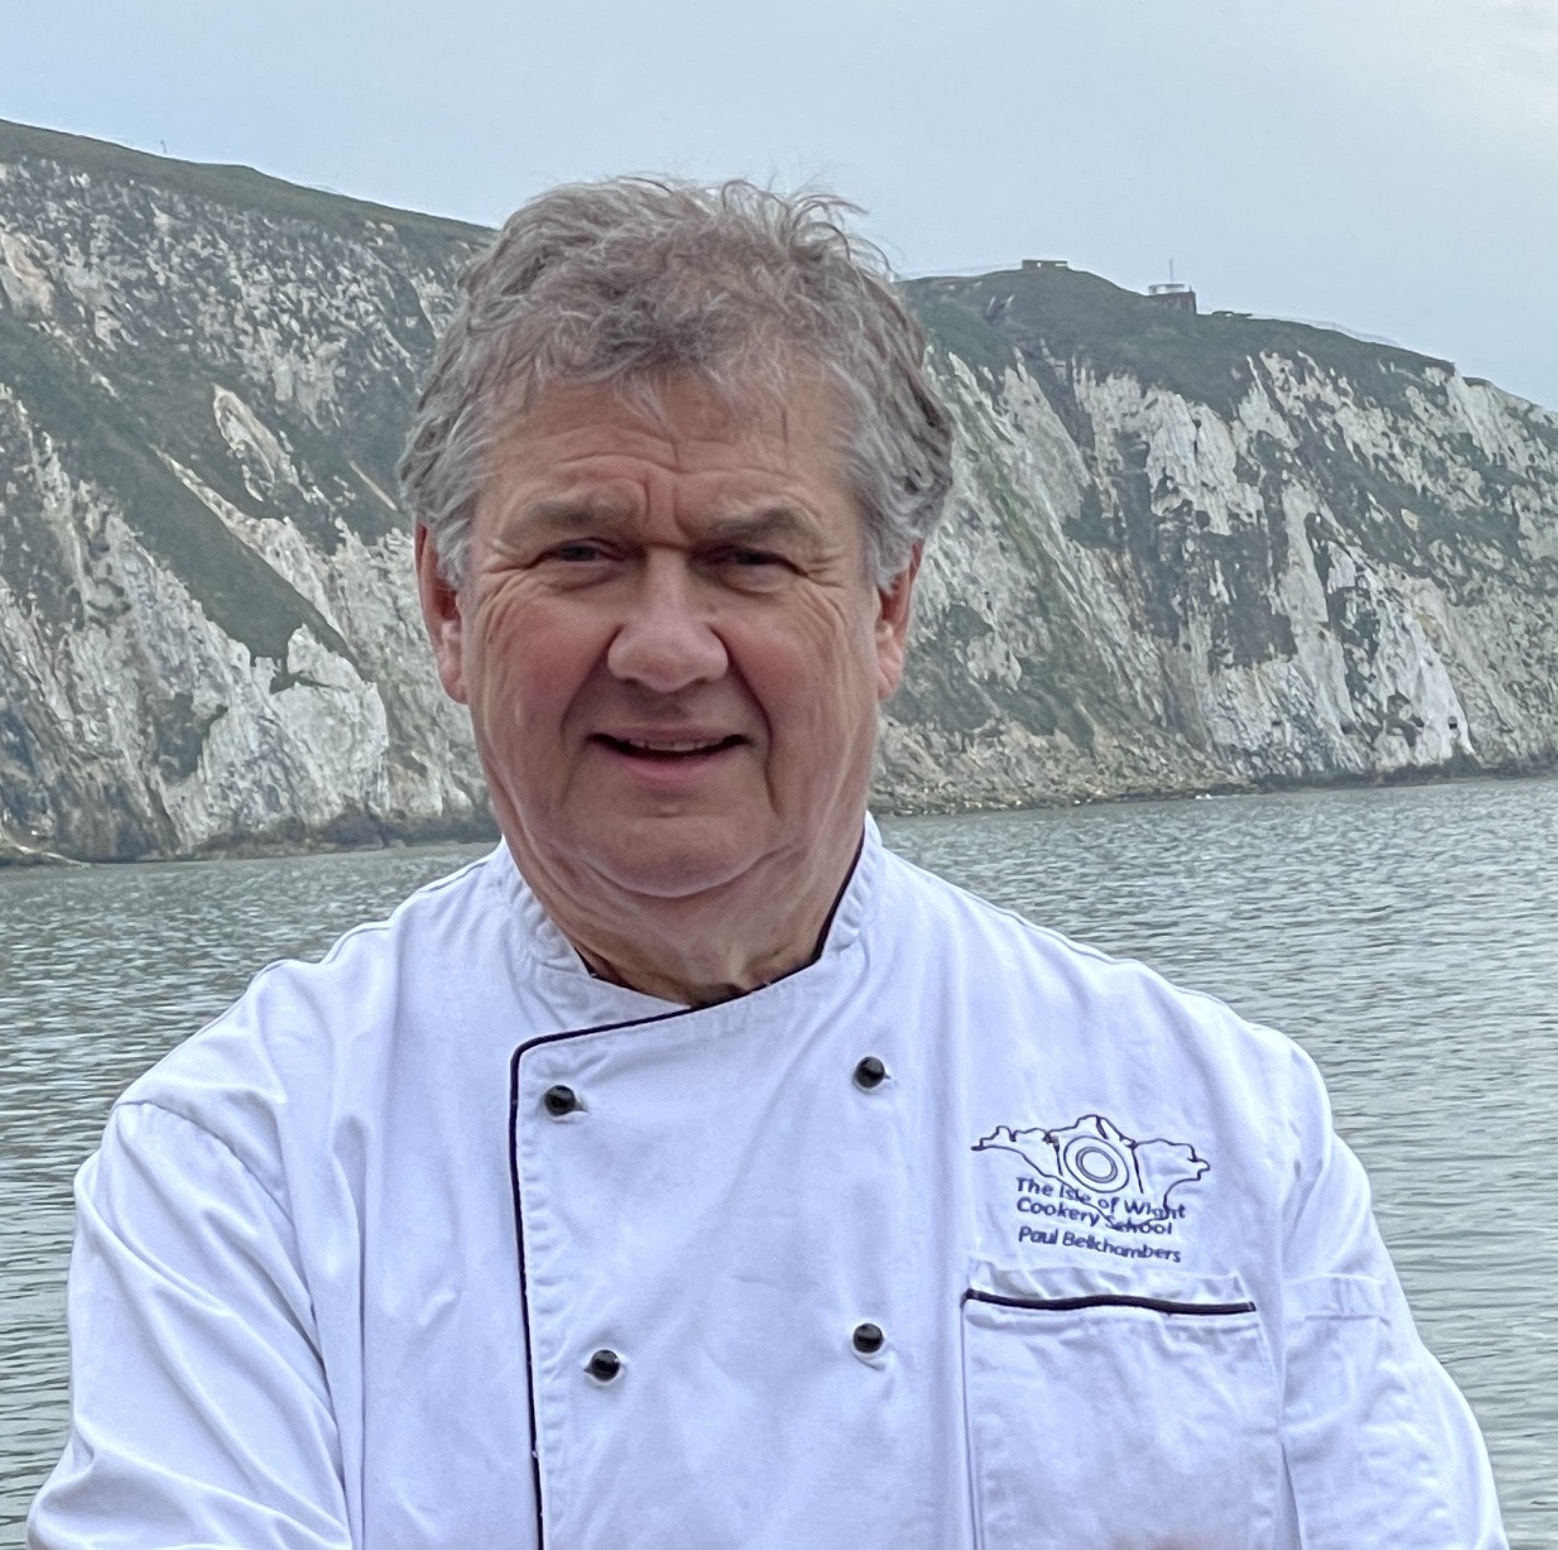 The Great Wight Bite welcomes Paul Bellchambers artisan chef, food writer & teacher from The Isle of Wight Cookery School